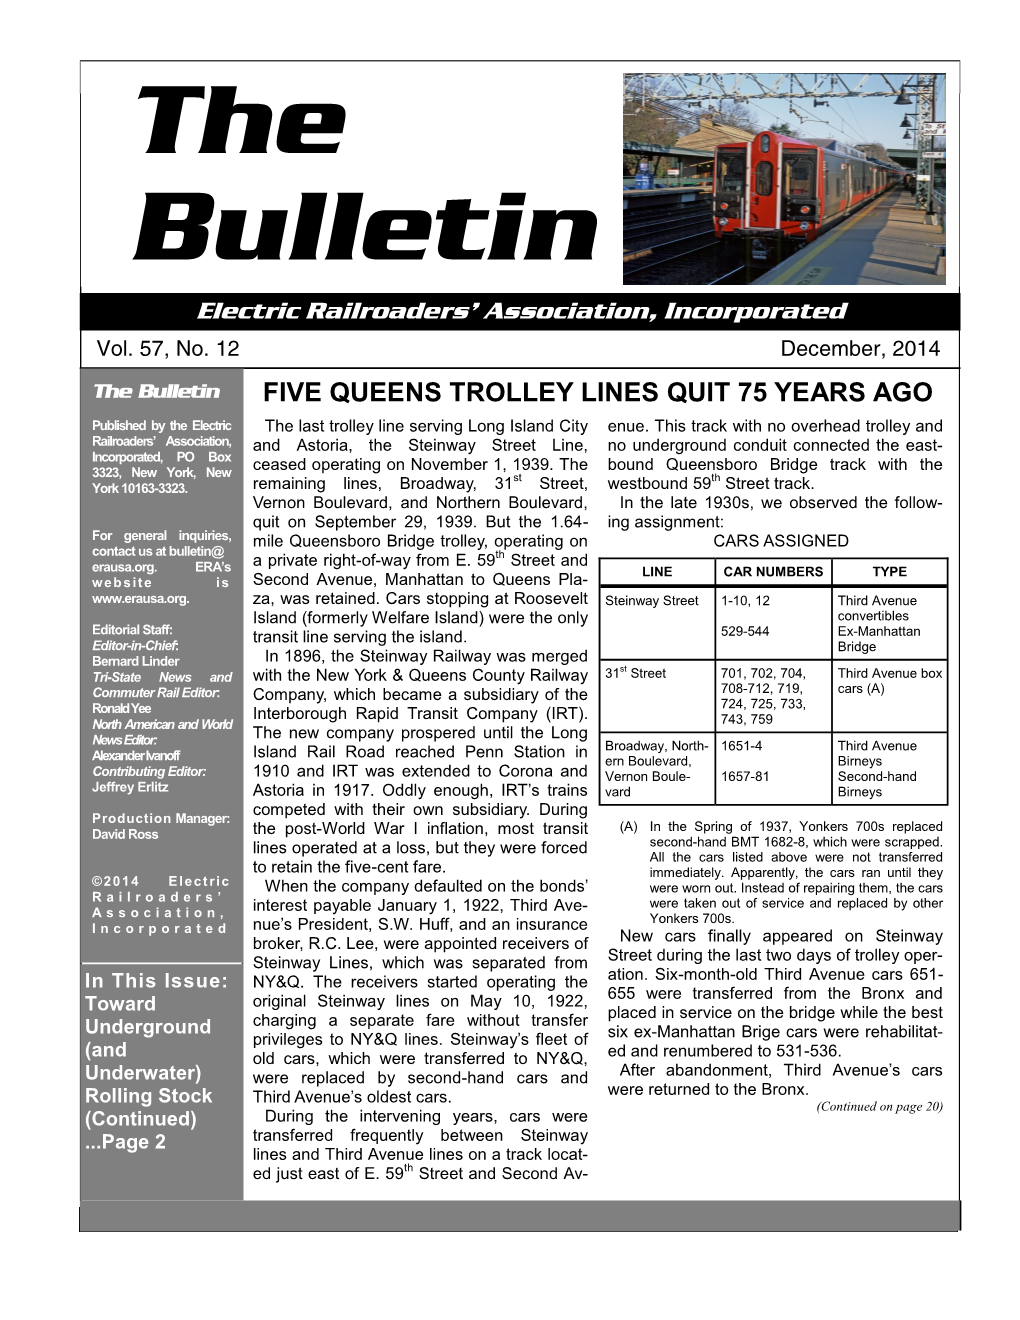 The Bulletin FIVE QUEENS TROLLEY LINES QUIT 75 YEARS AGO